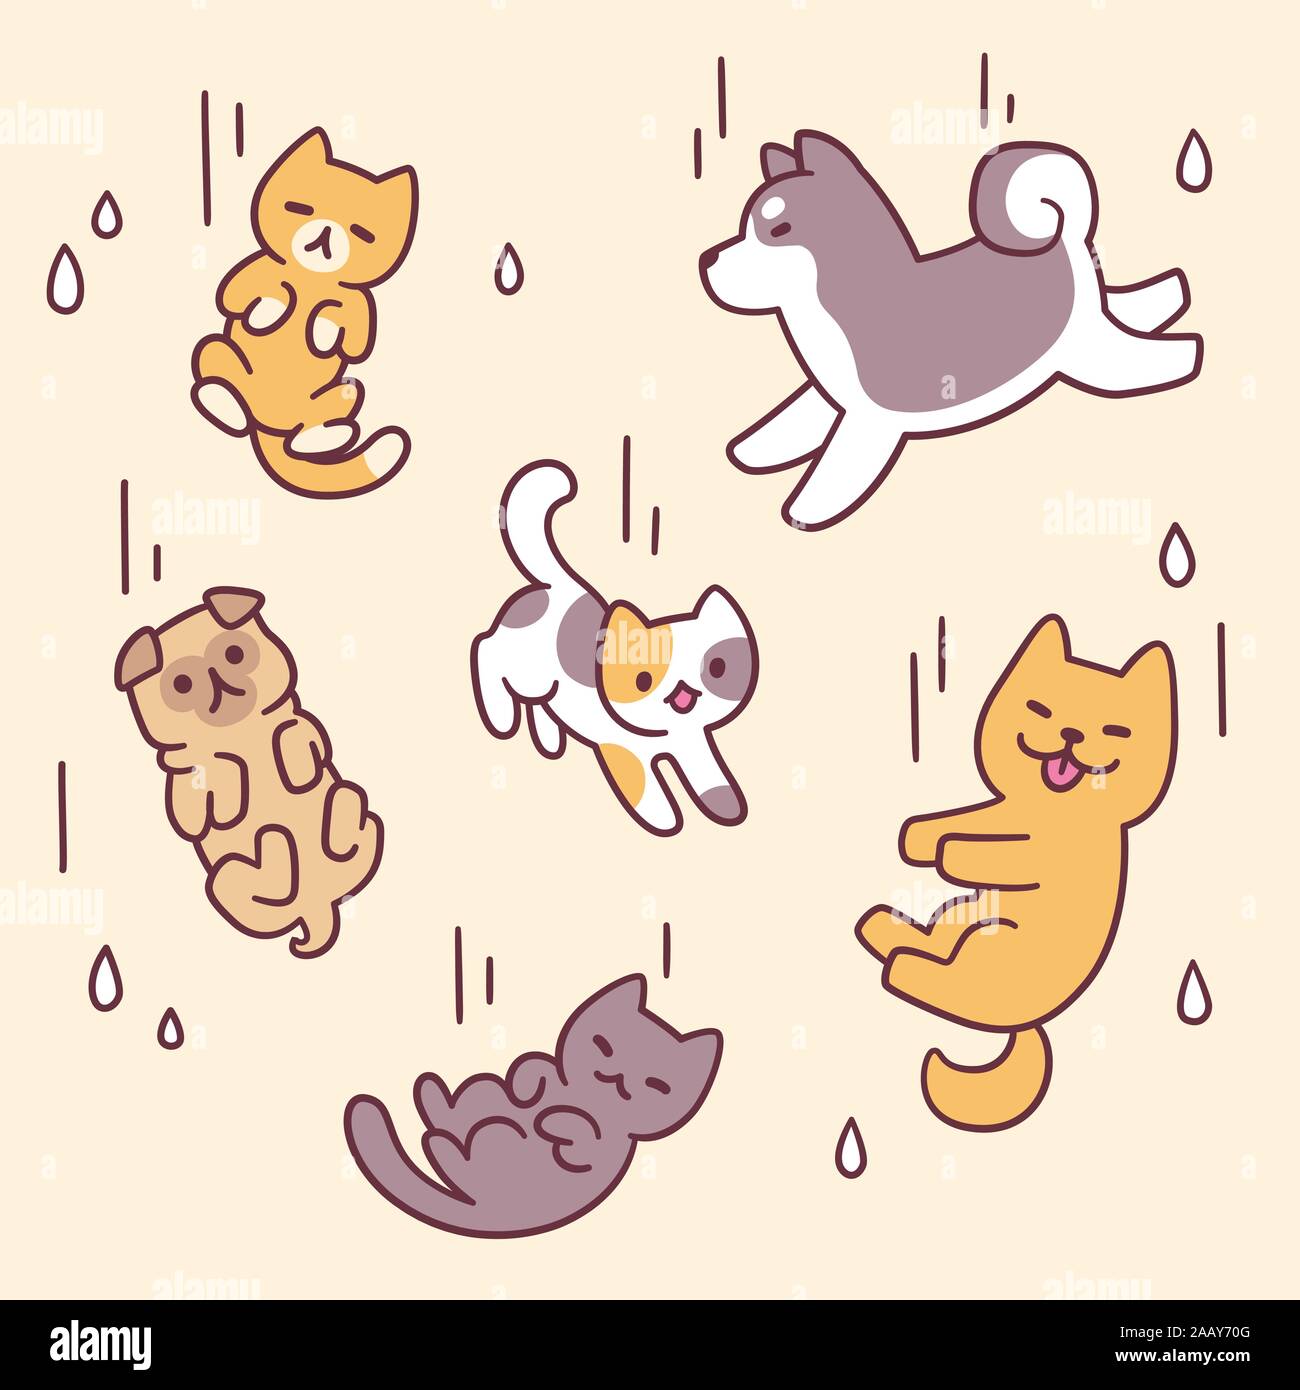 Raining Cats And Dogs Stock Photos Raining Cats And Dogs